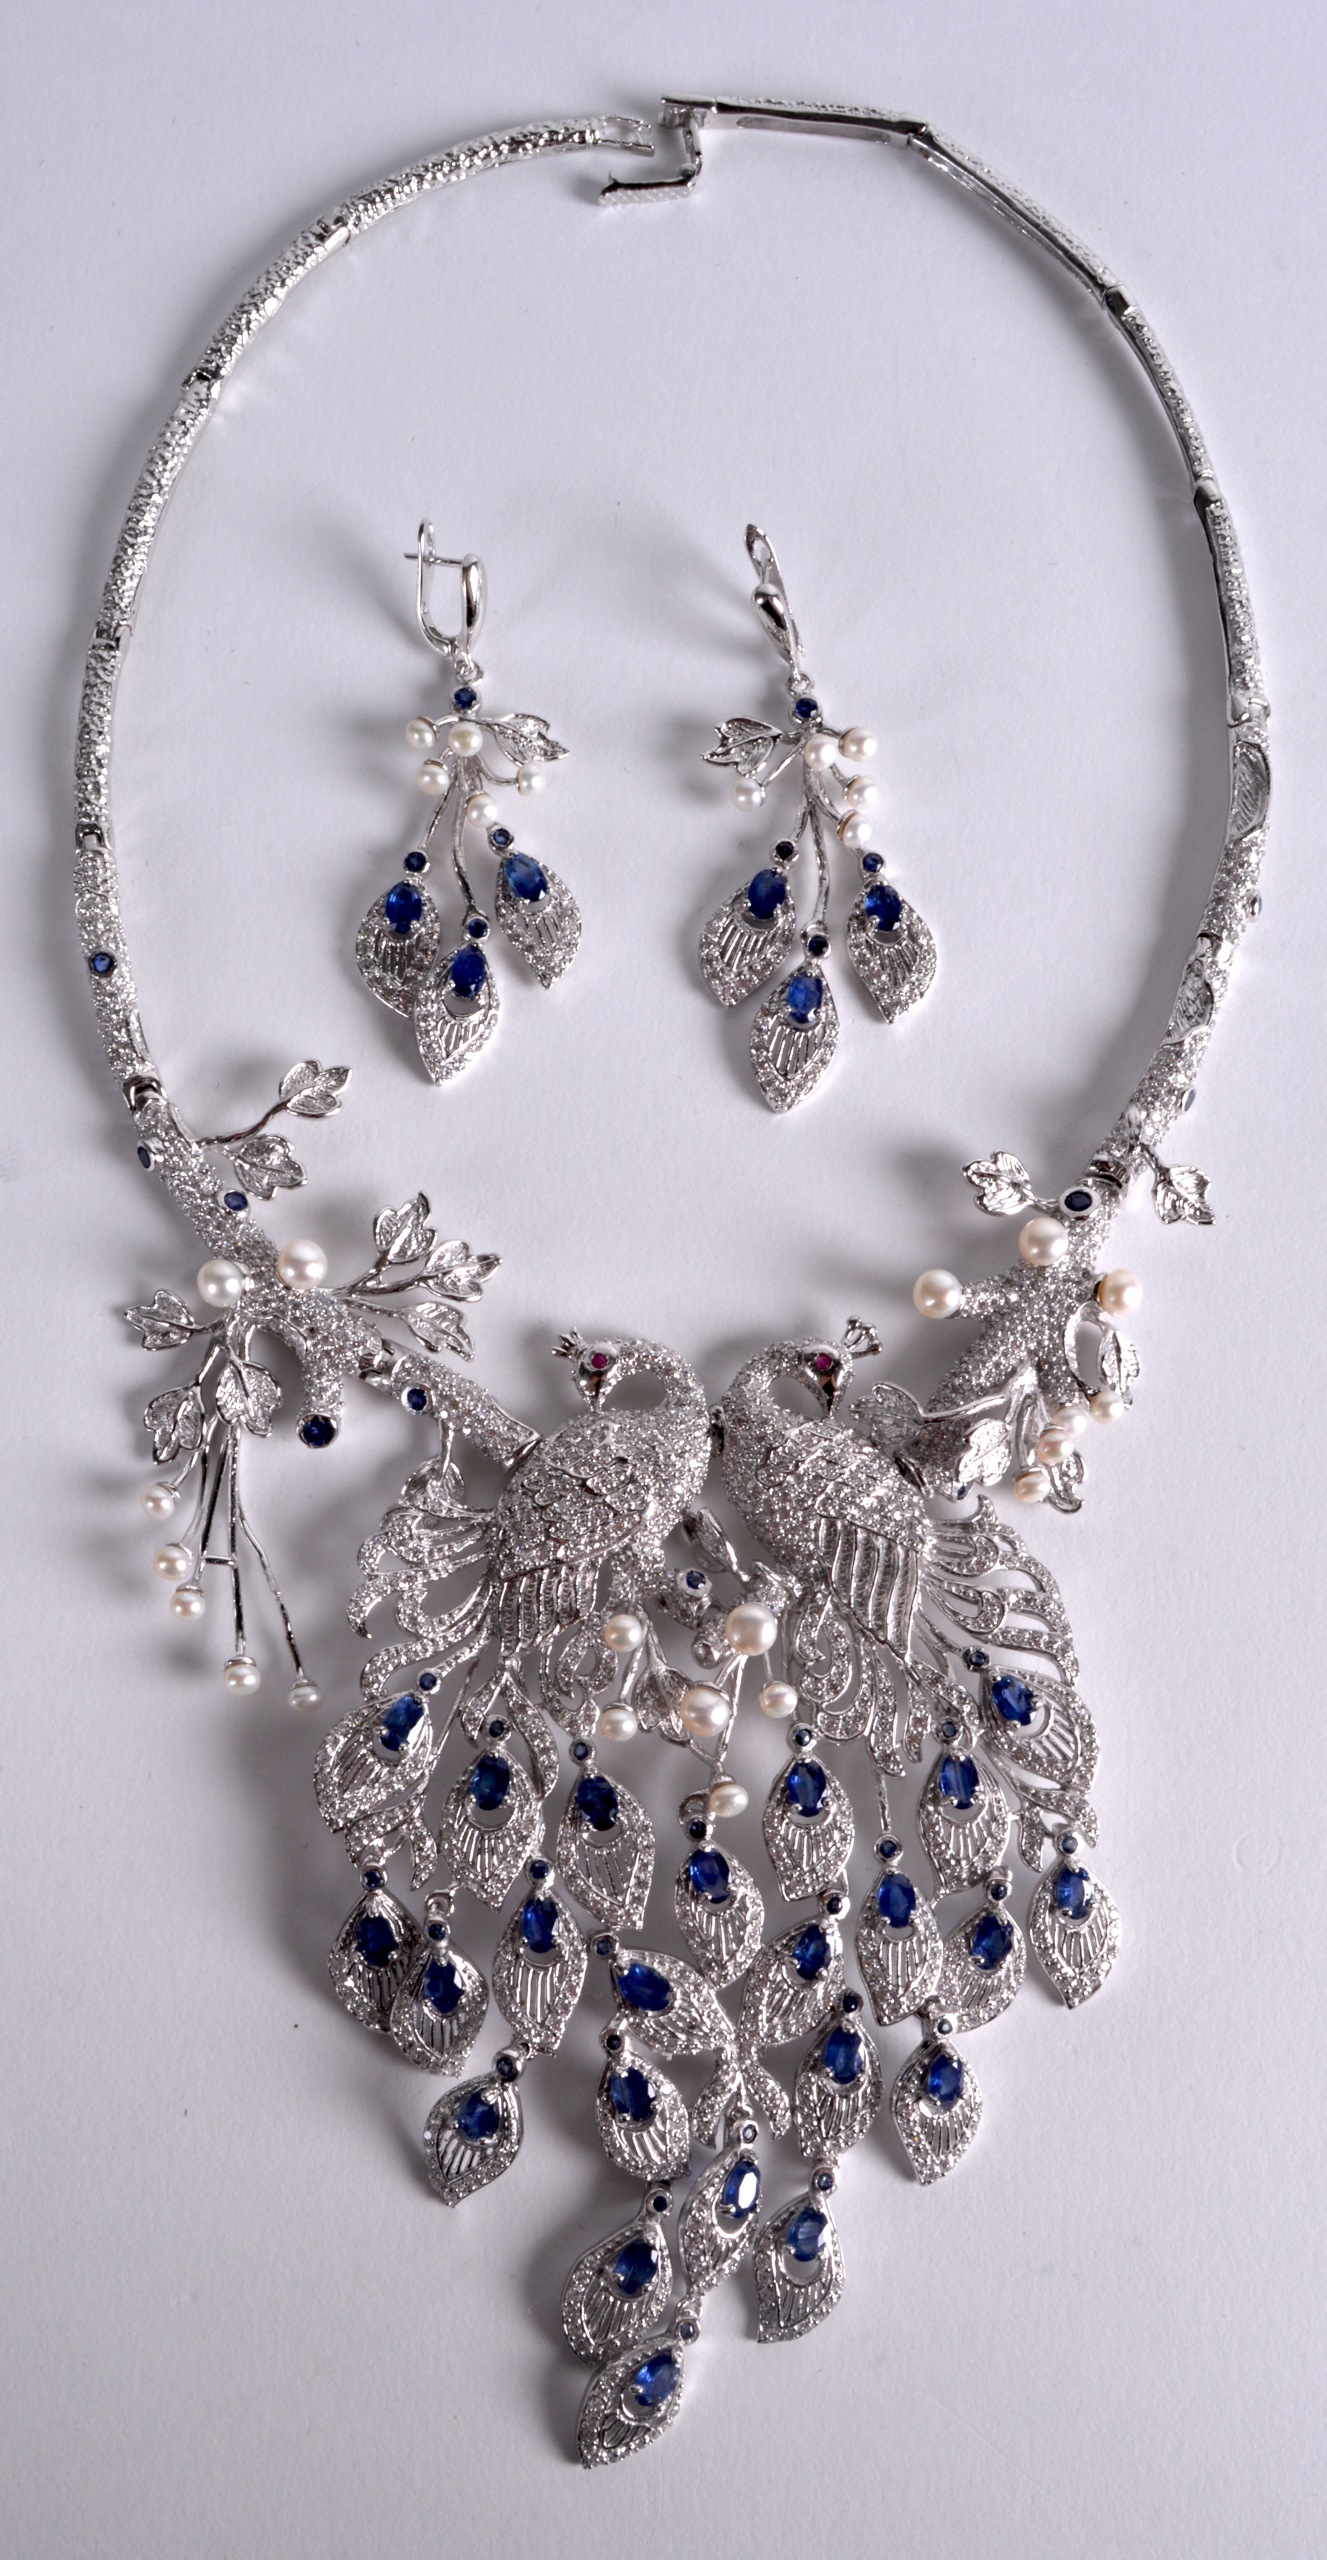 AN ART DECO DESIGN SAPPHIRE, RUBY, PEARL AND CZ PEACOCK NECKLACE AND EARRINGS.